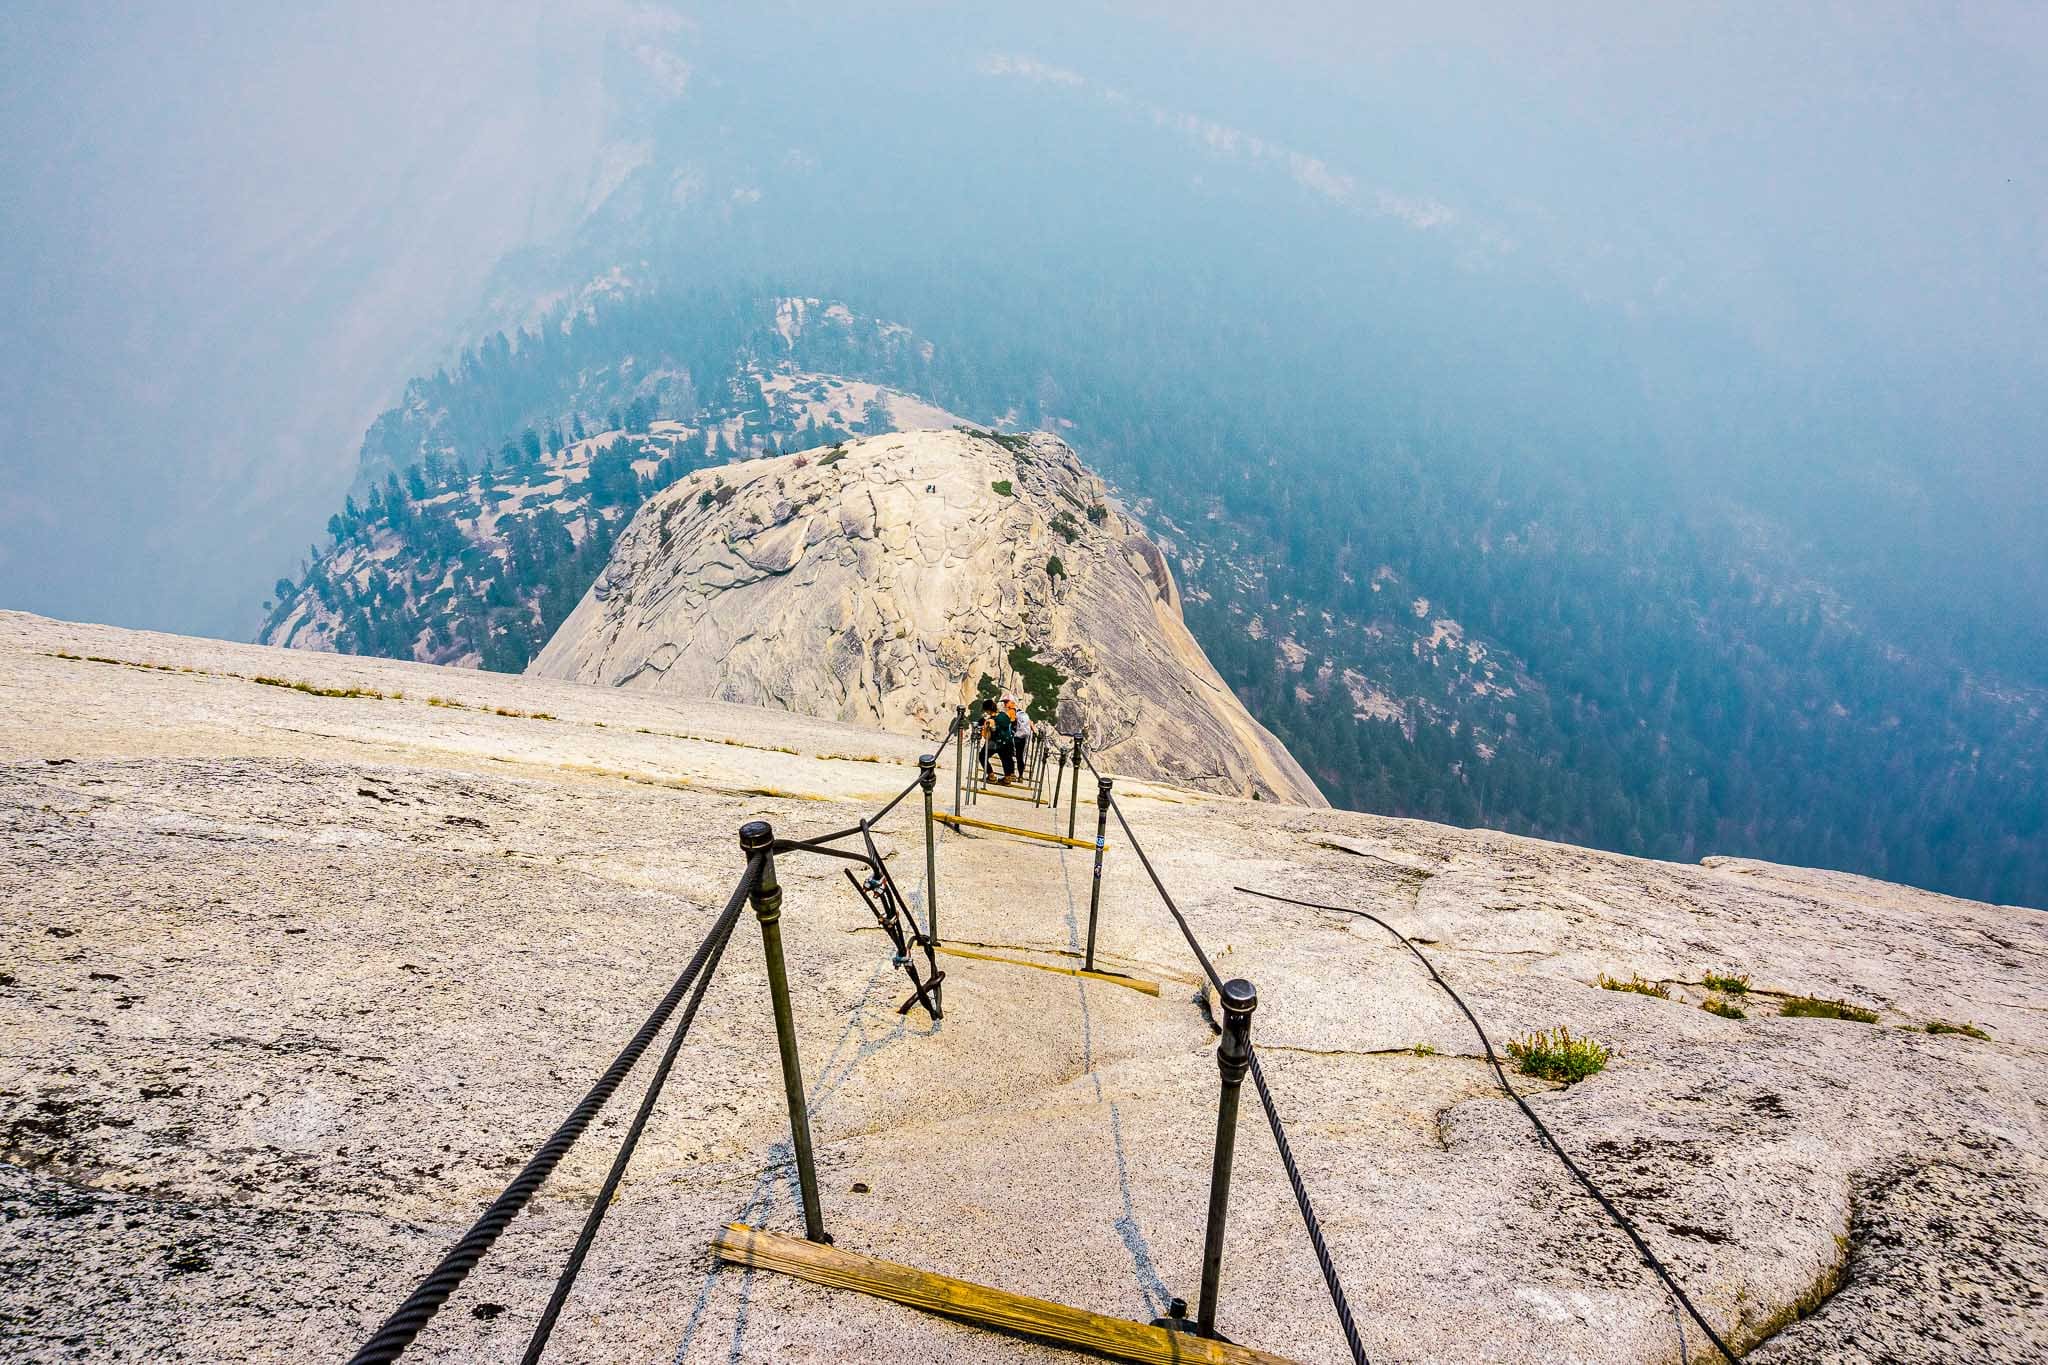 Guided Backpacking the Iconic Half Dome in Yosemite National Park, California